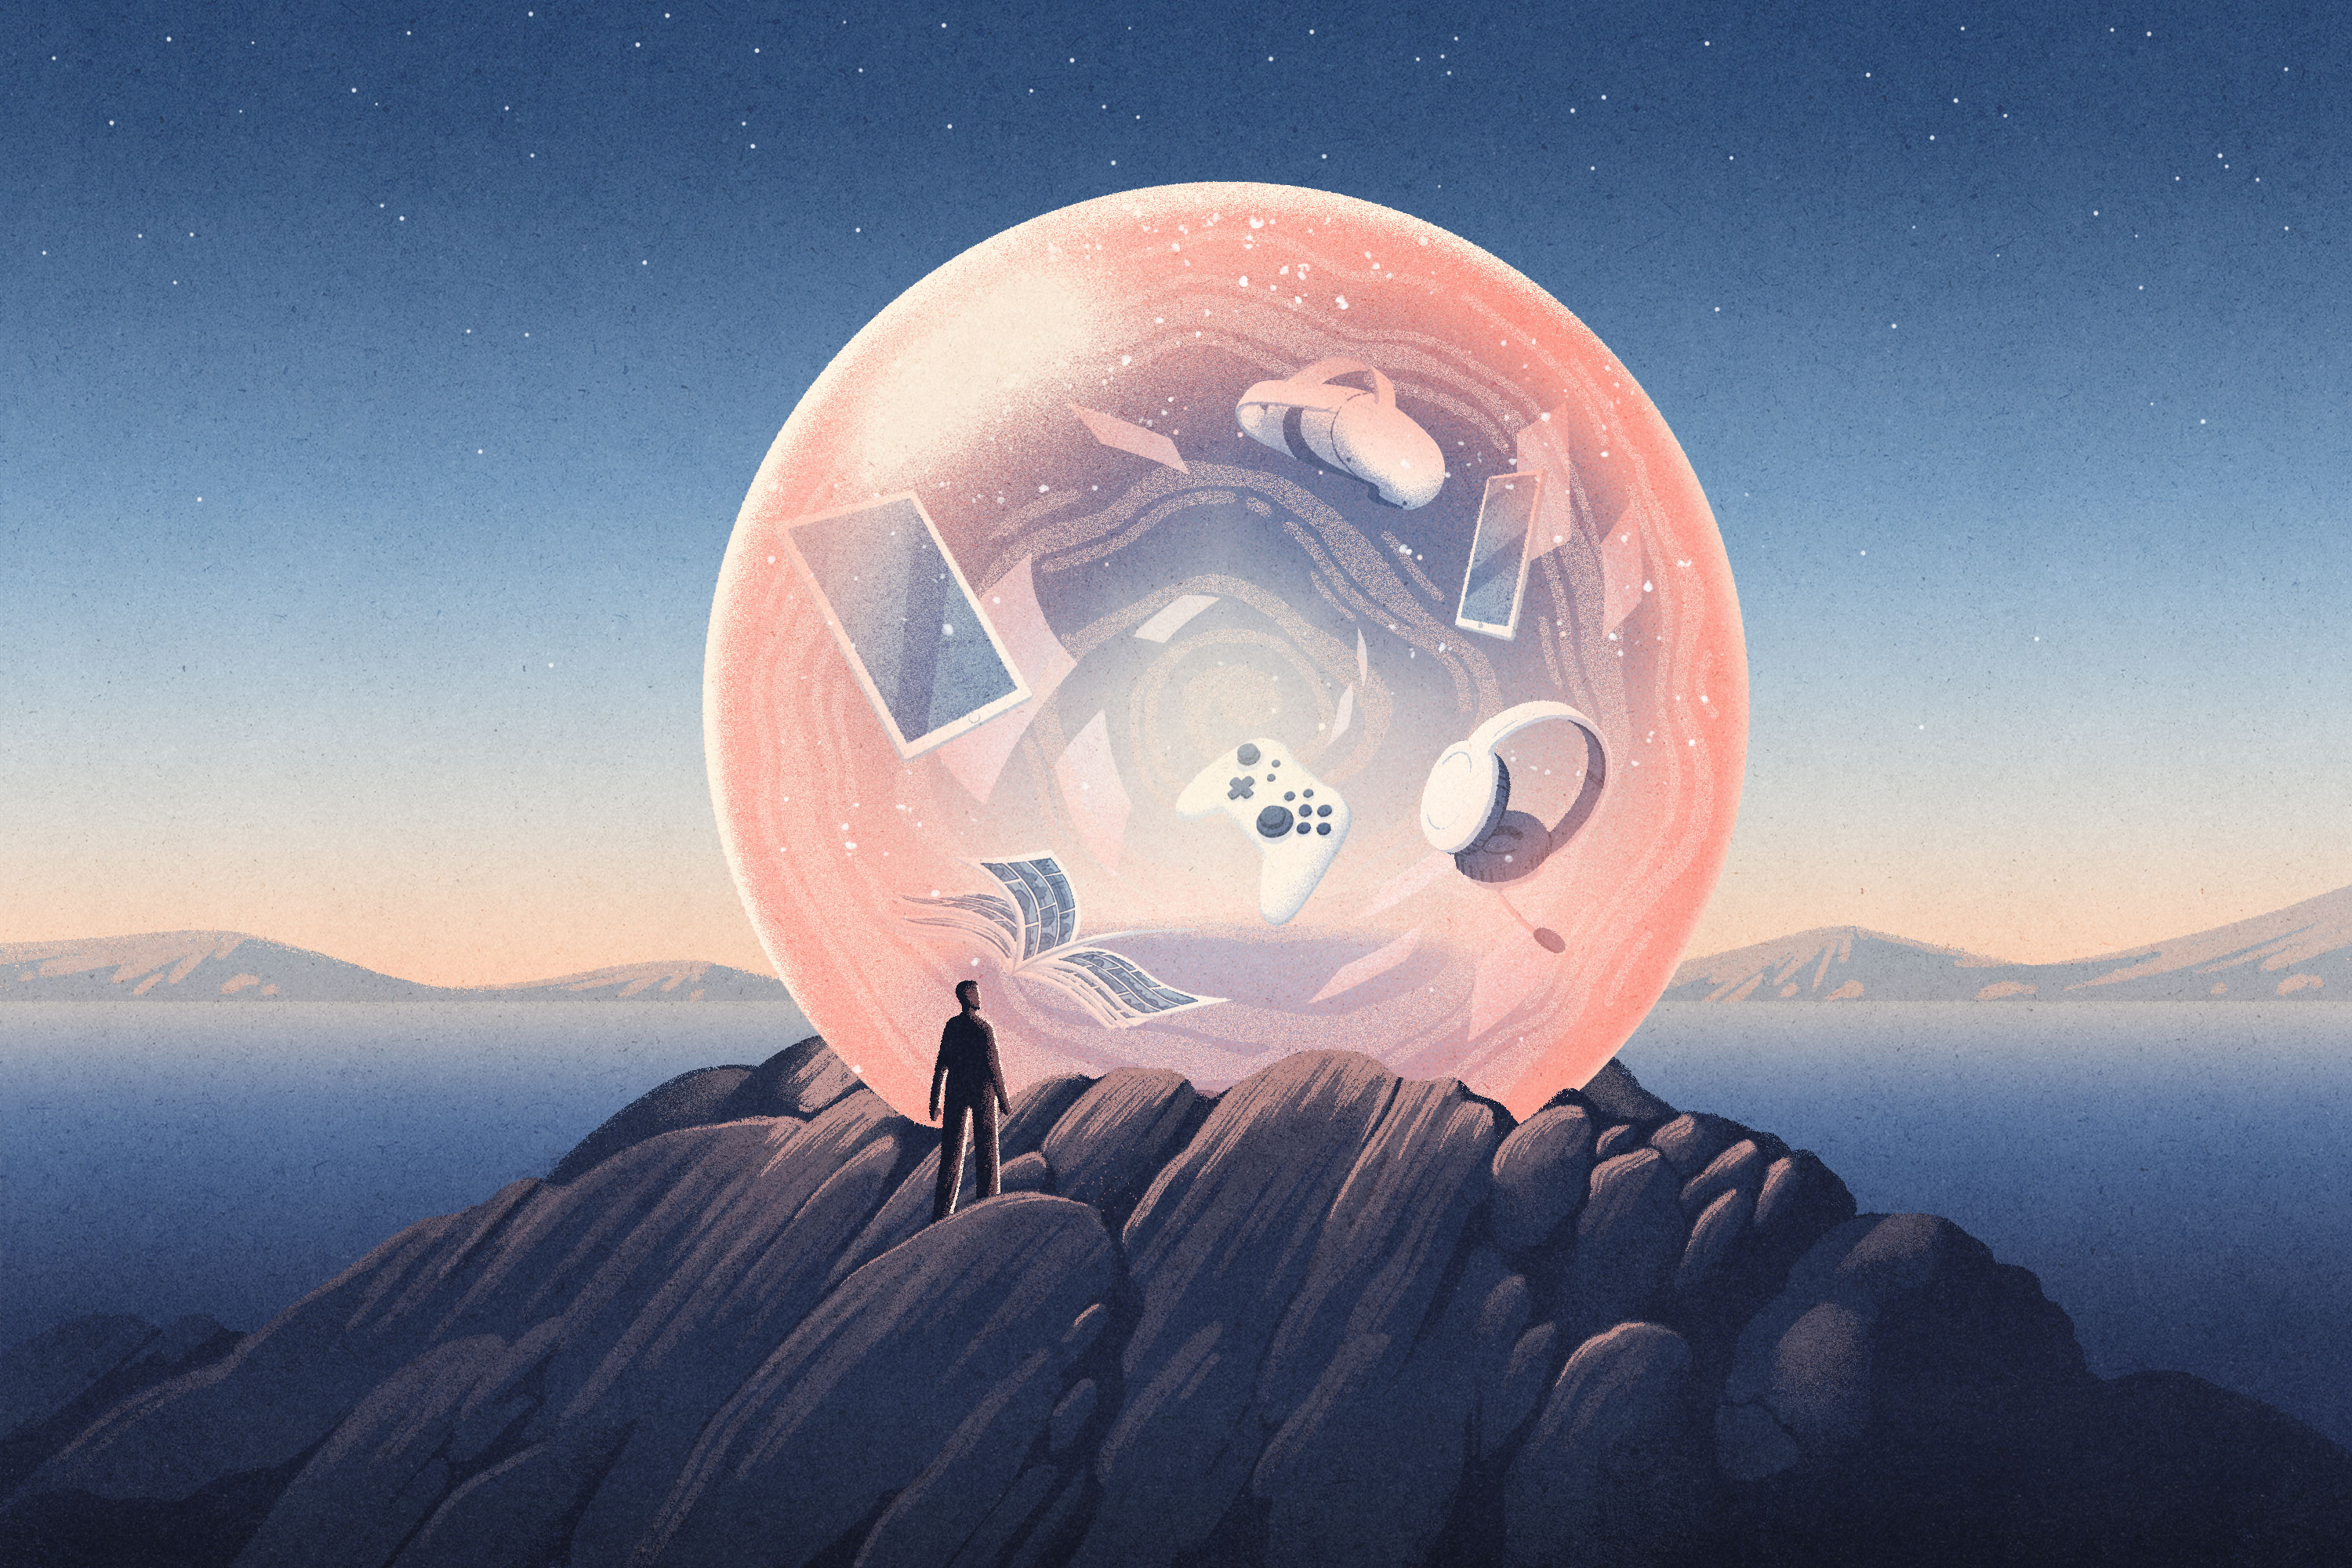 the illustration depicts a large see-through orb sitting on top of a mountain. a human figure is standing in front of it. within the orb are various devices from entertainment and technology, including game controllers, vr headsets and headphones